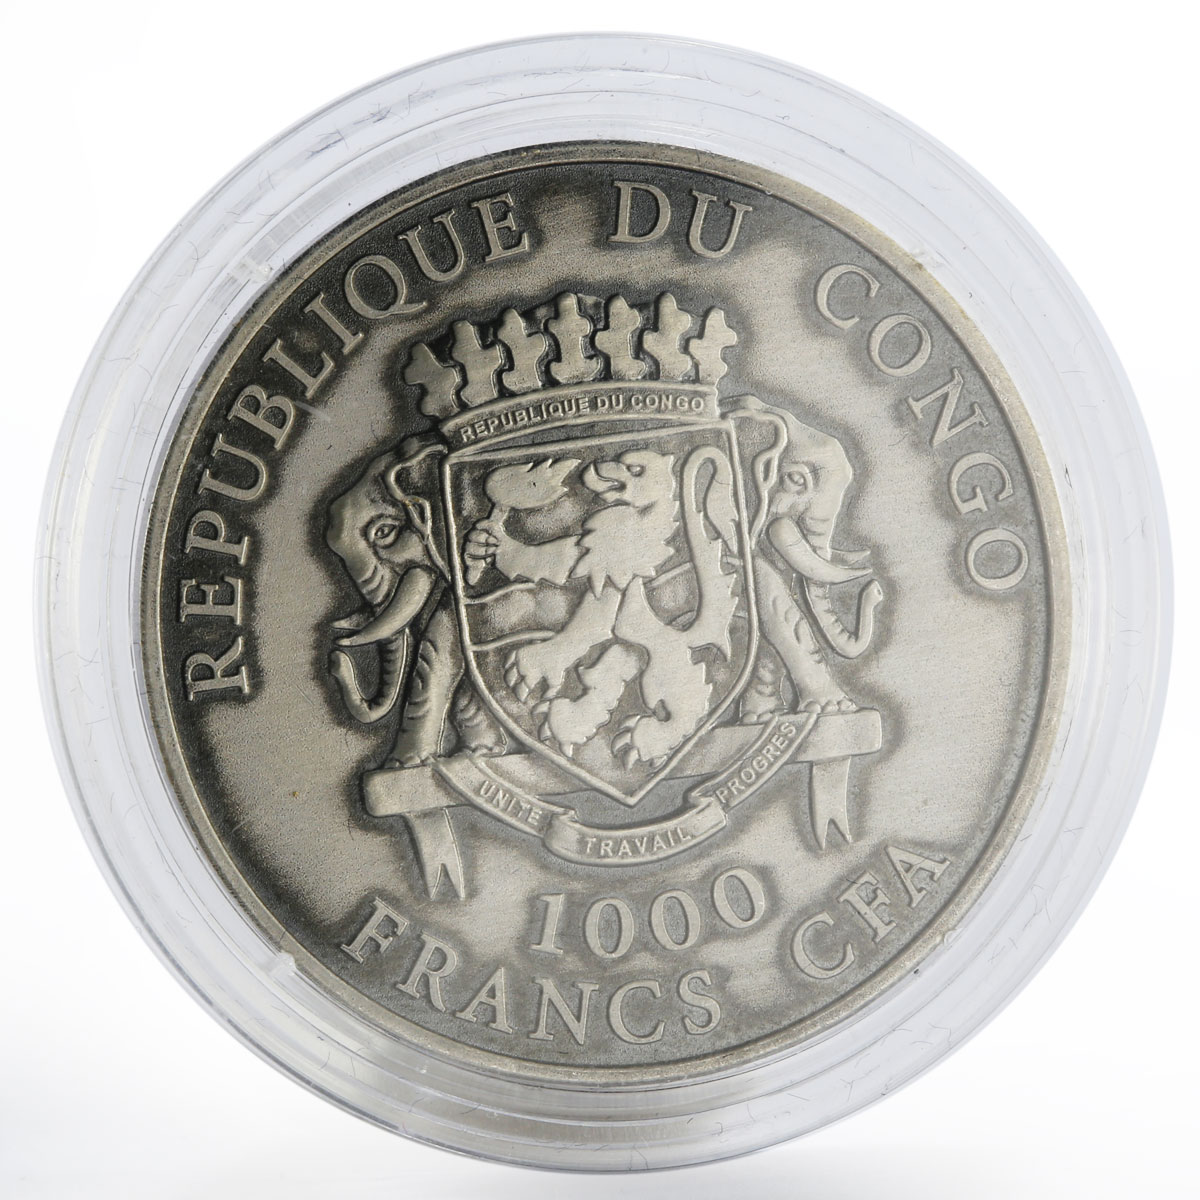 Congo 1000 francs Baptizing of Child gilded silver coin 2010